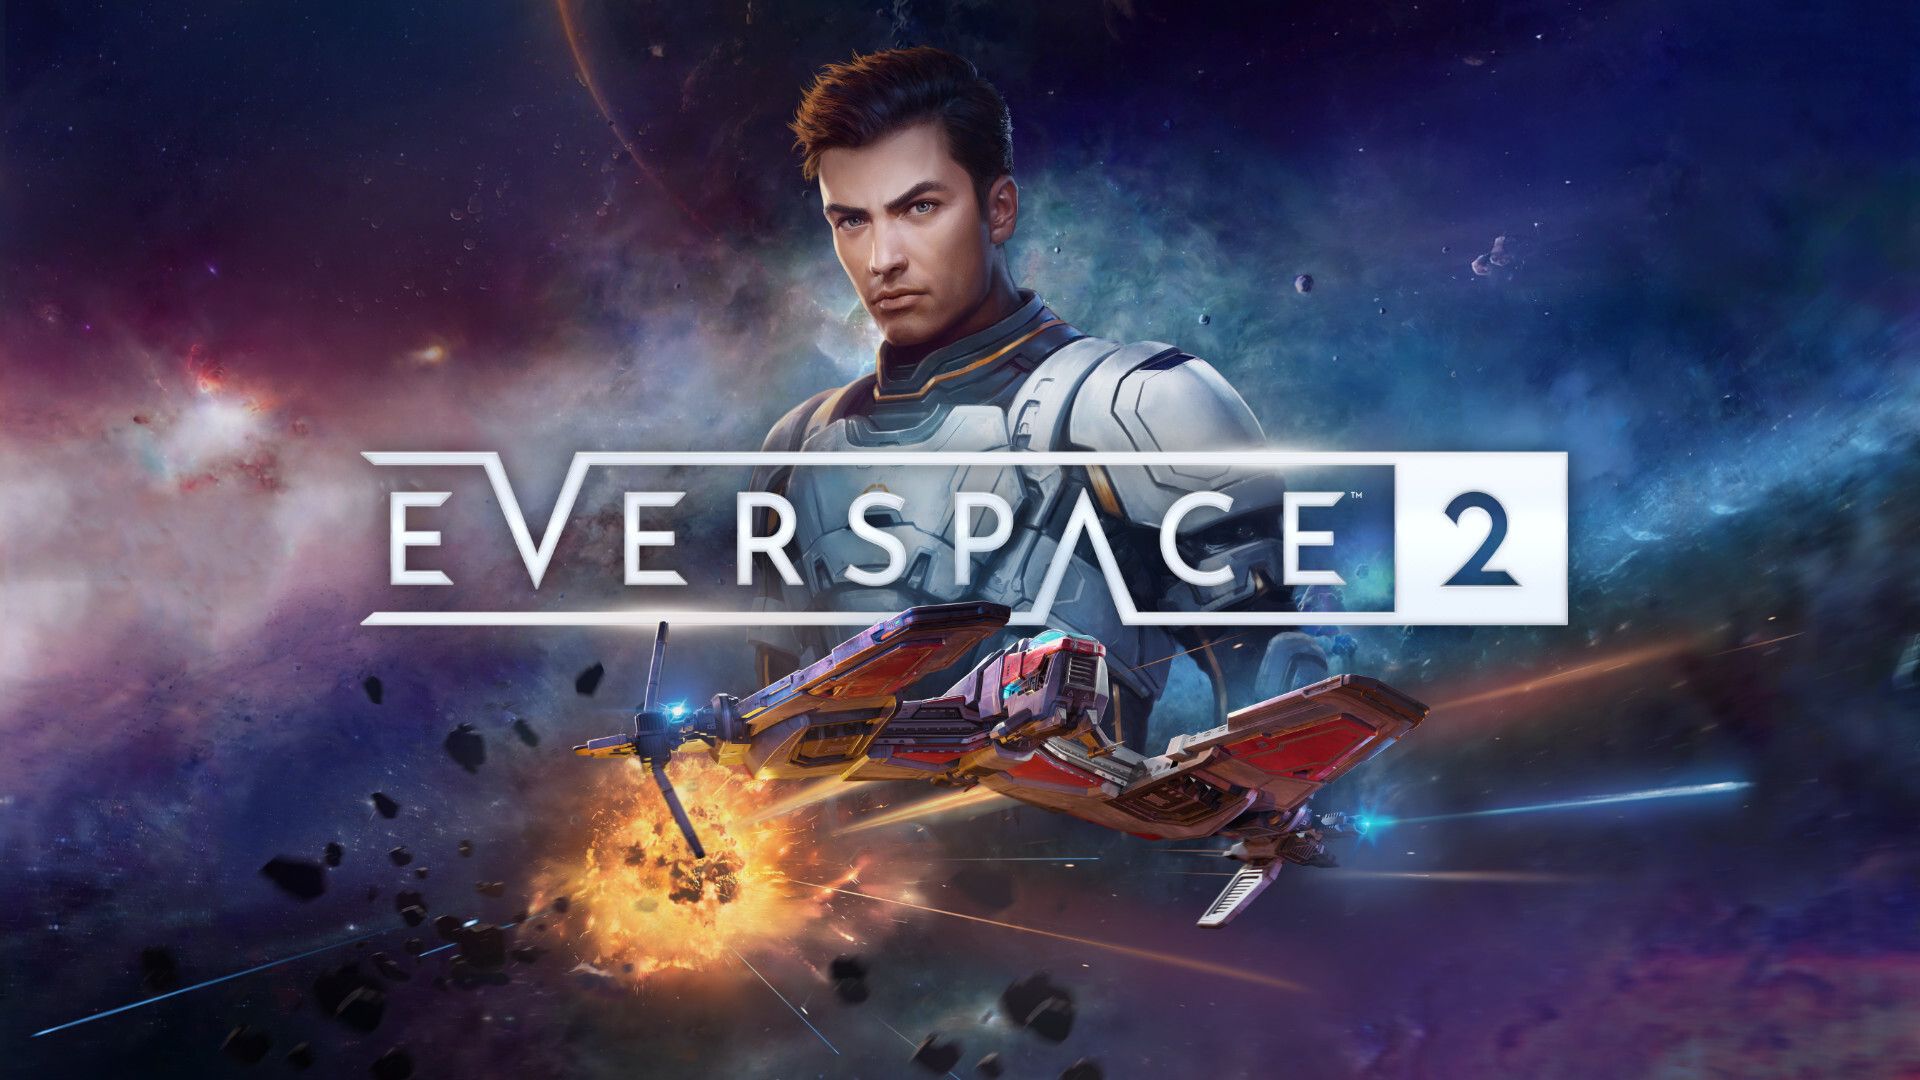 Save 20% on Forever Skies on Steam